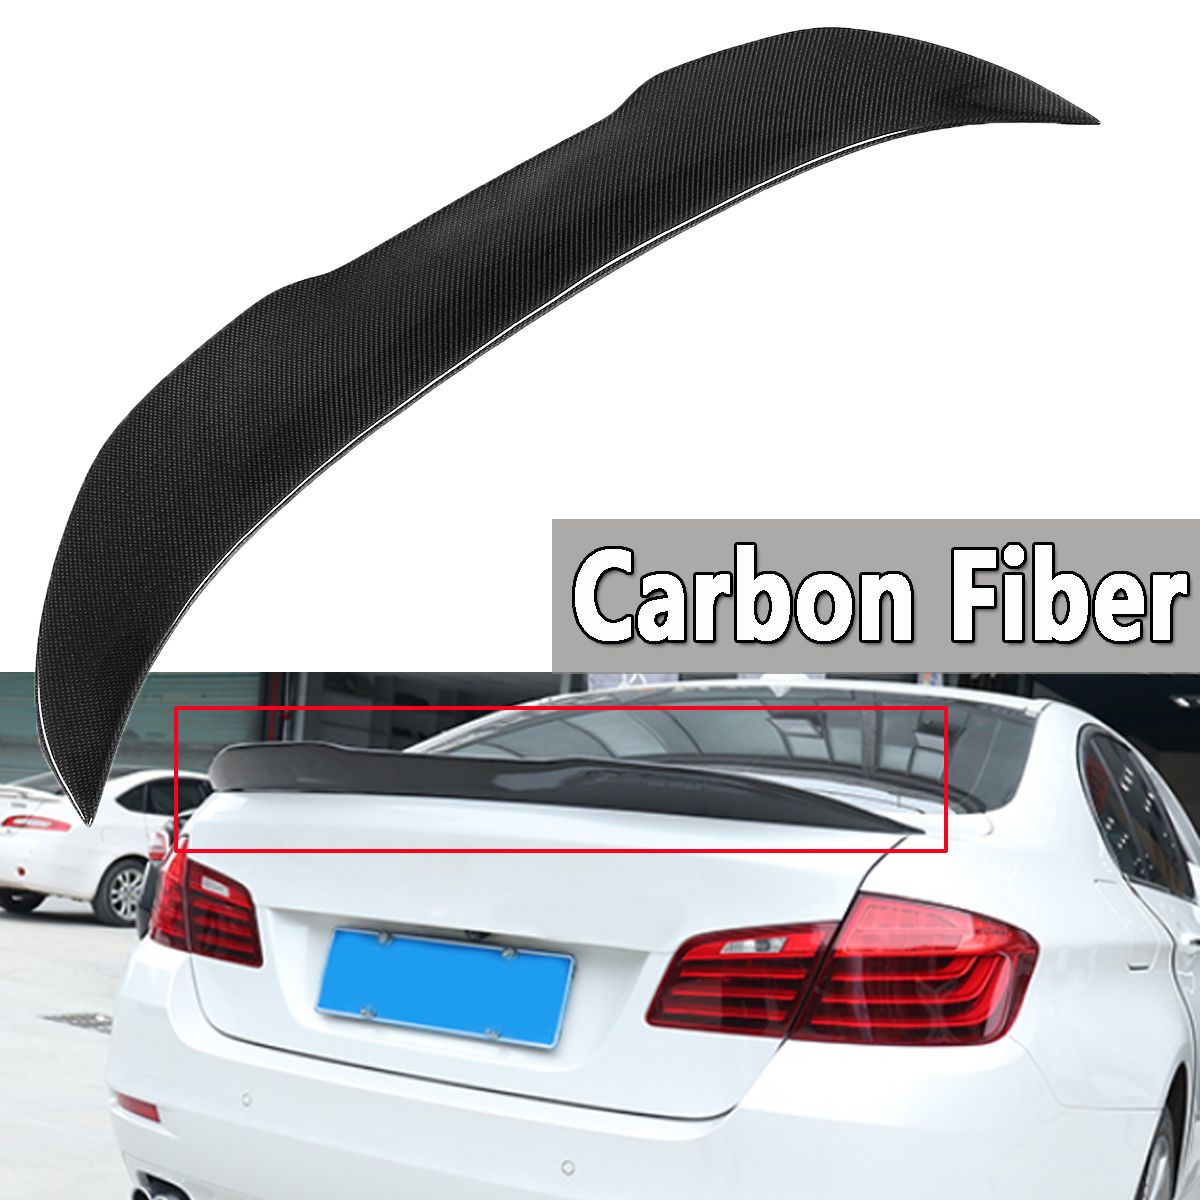 Carbon-Fiber-High-Kick-PSM-Style-Trunk-Car-Spoiler-Wing-For-BMW-F10-M5-5-Series-2011-2017-1555414